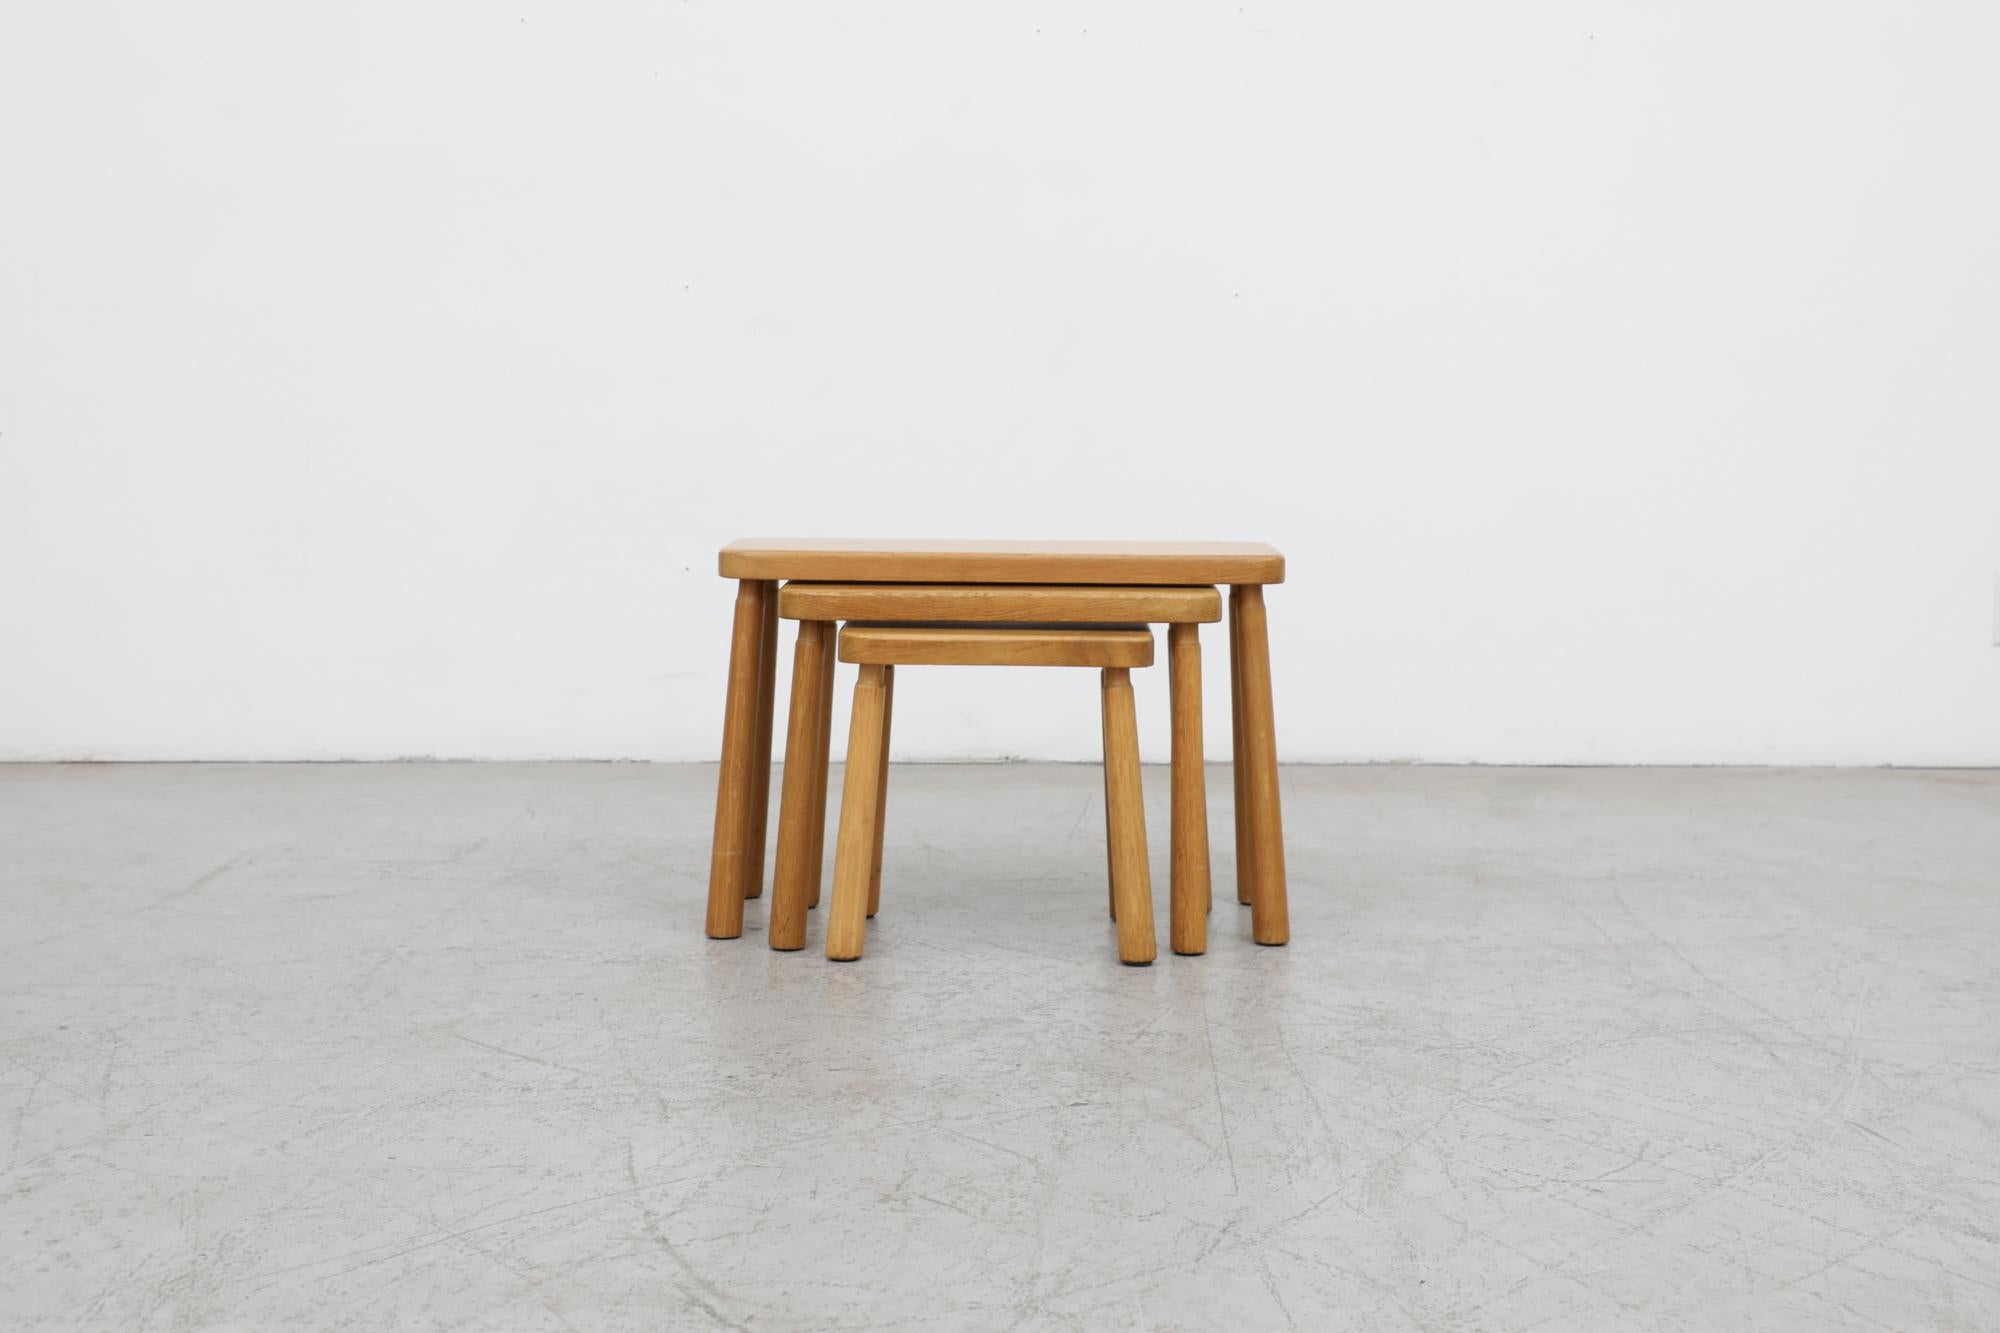 Set of 3 Charlotte Perriand style oak nesting tables with tall, round, skinny, slightly tapered legs that are wide on the bottom and narrowing at the top. The tops are solid oak with rounded edges. In original condition with wear consistent with age